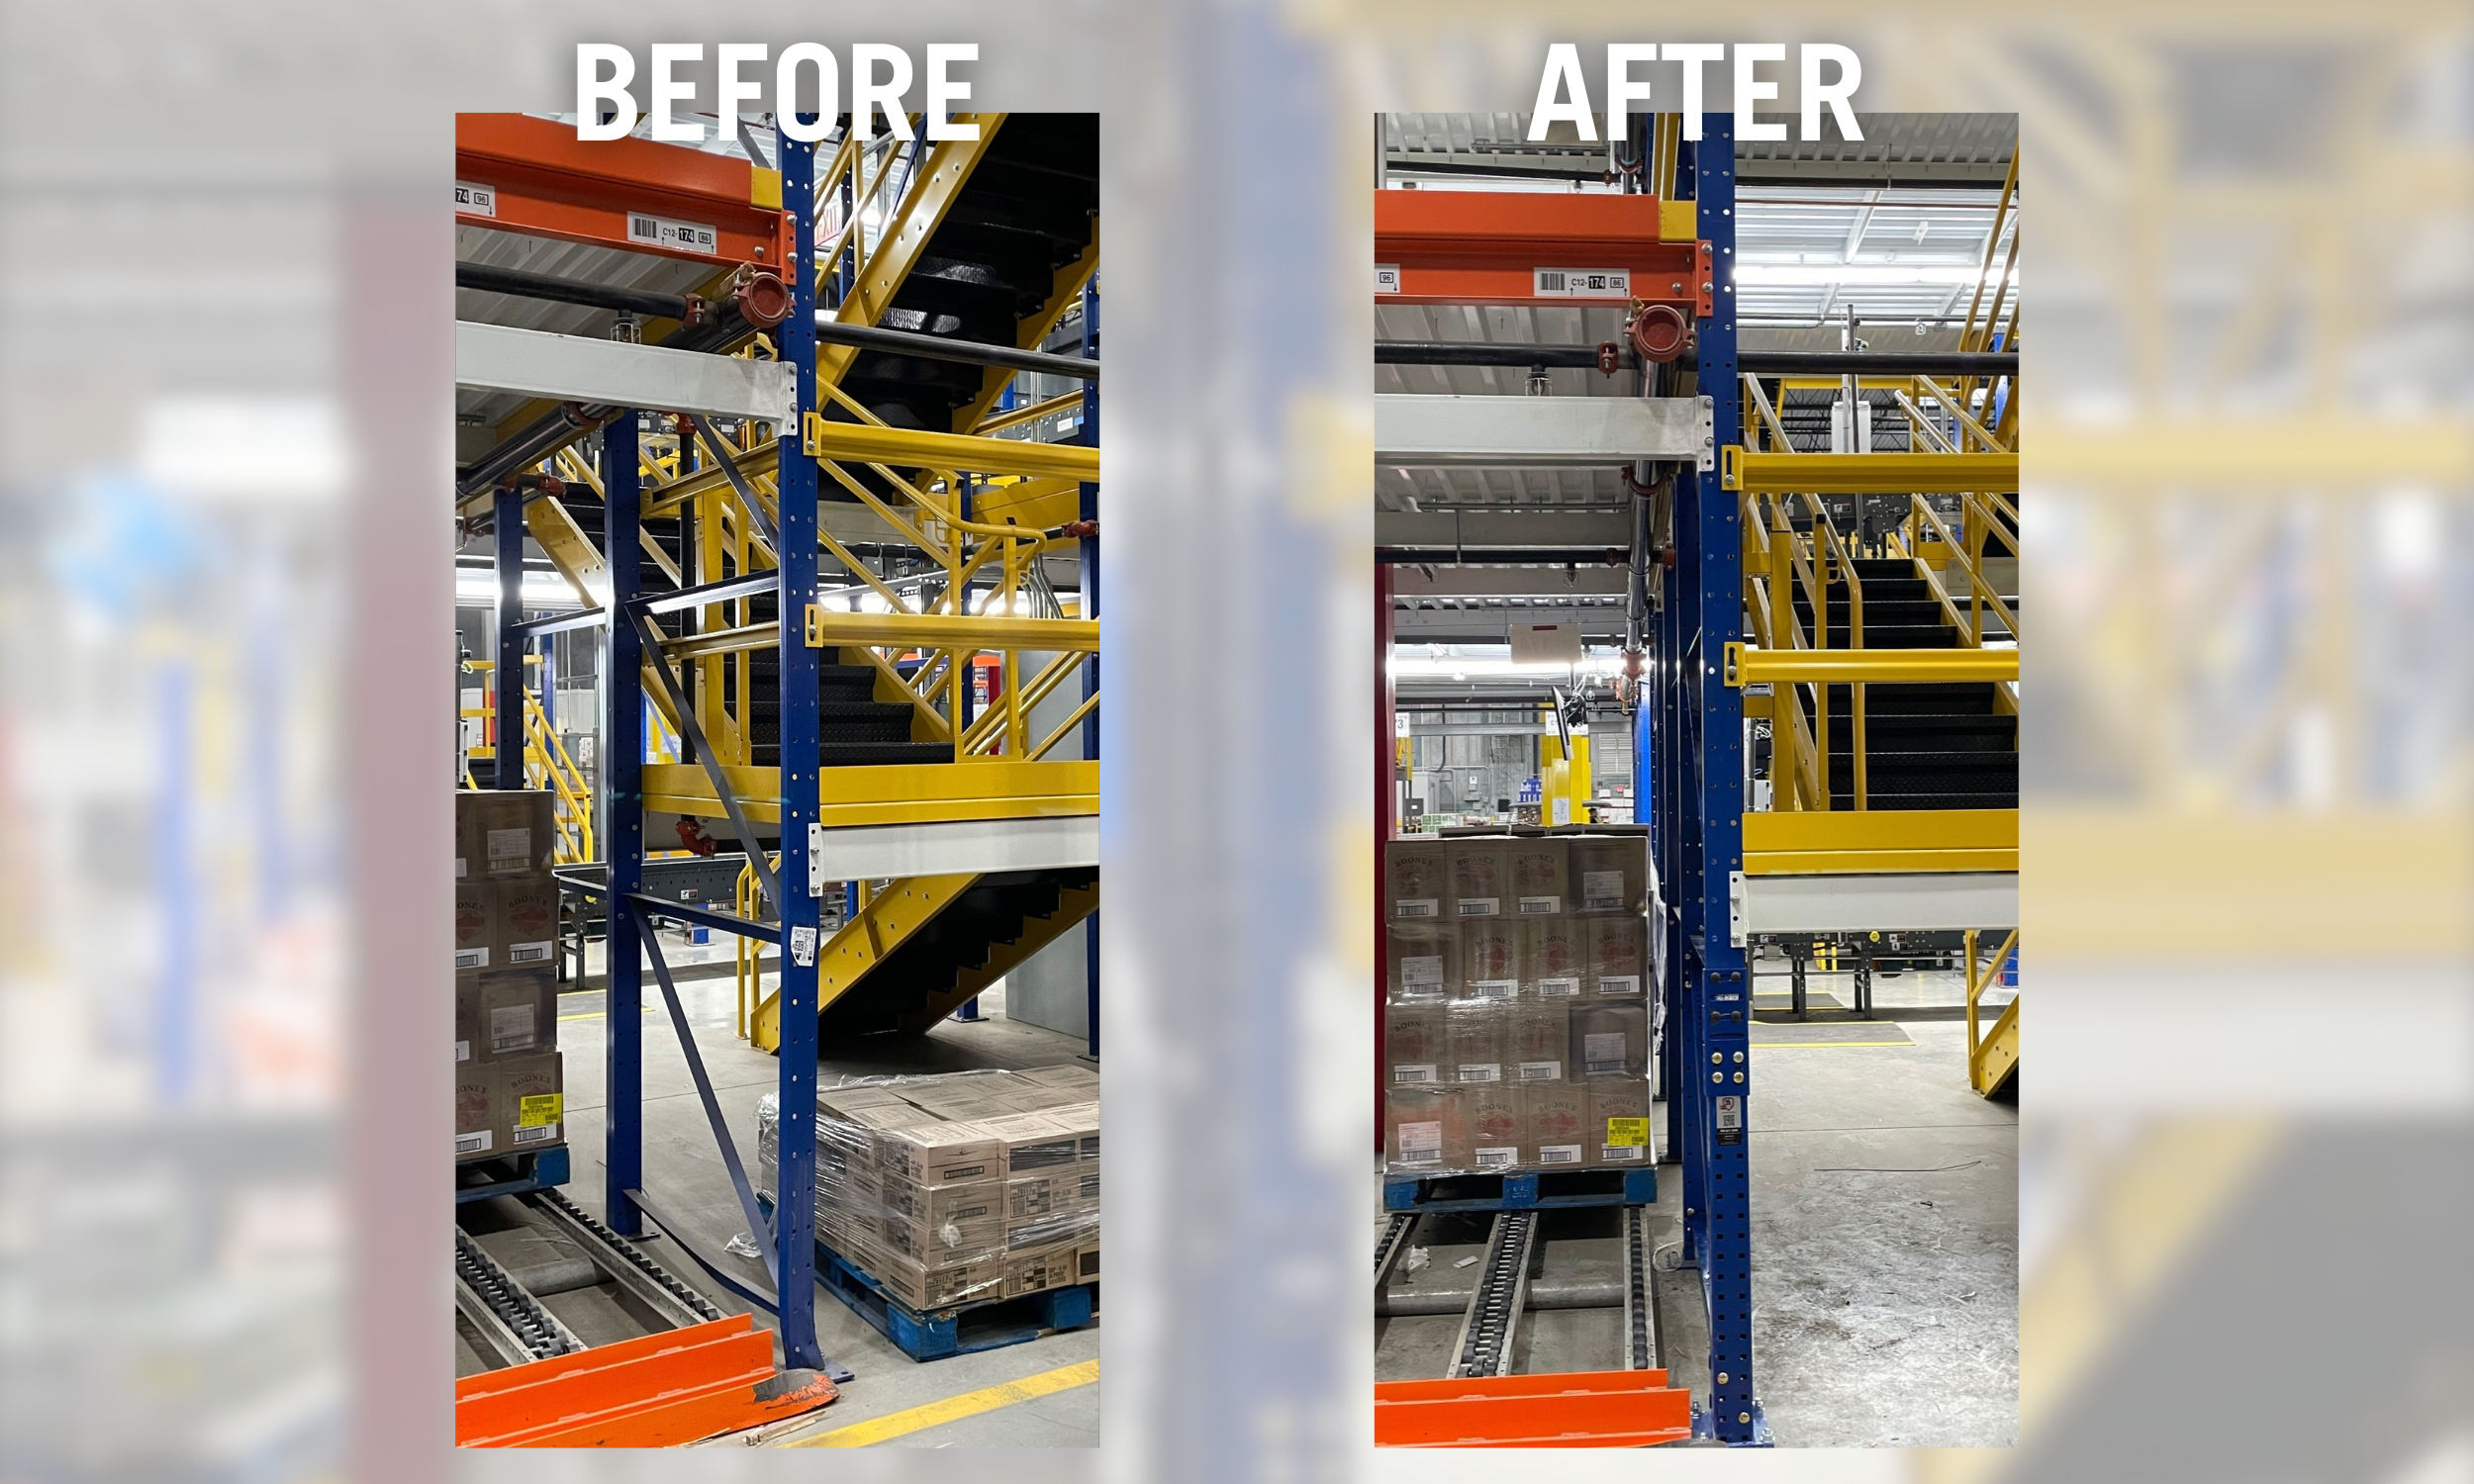 Centurion Mid Guard - Mezzanine Upright Repair Before & After